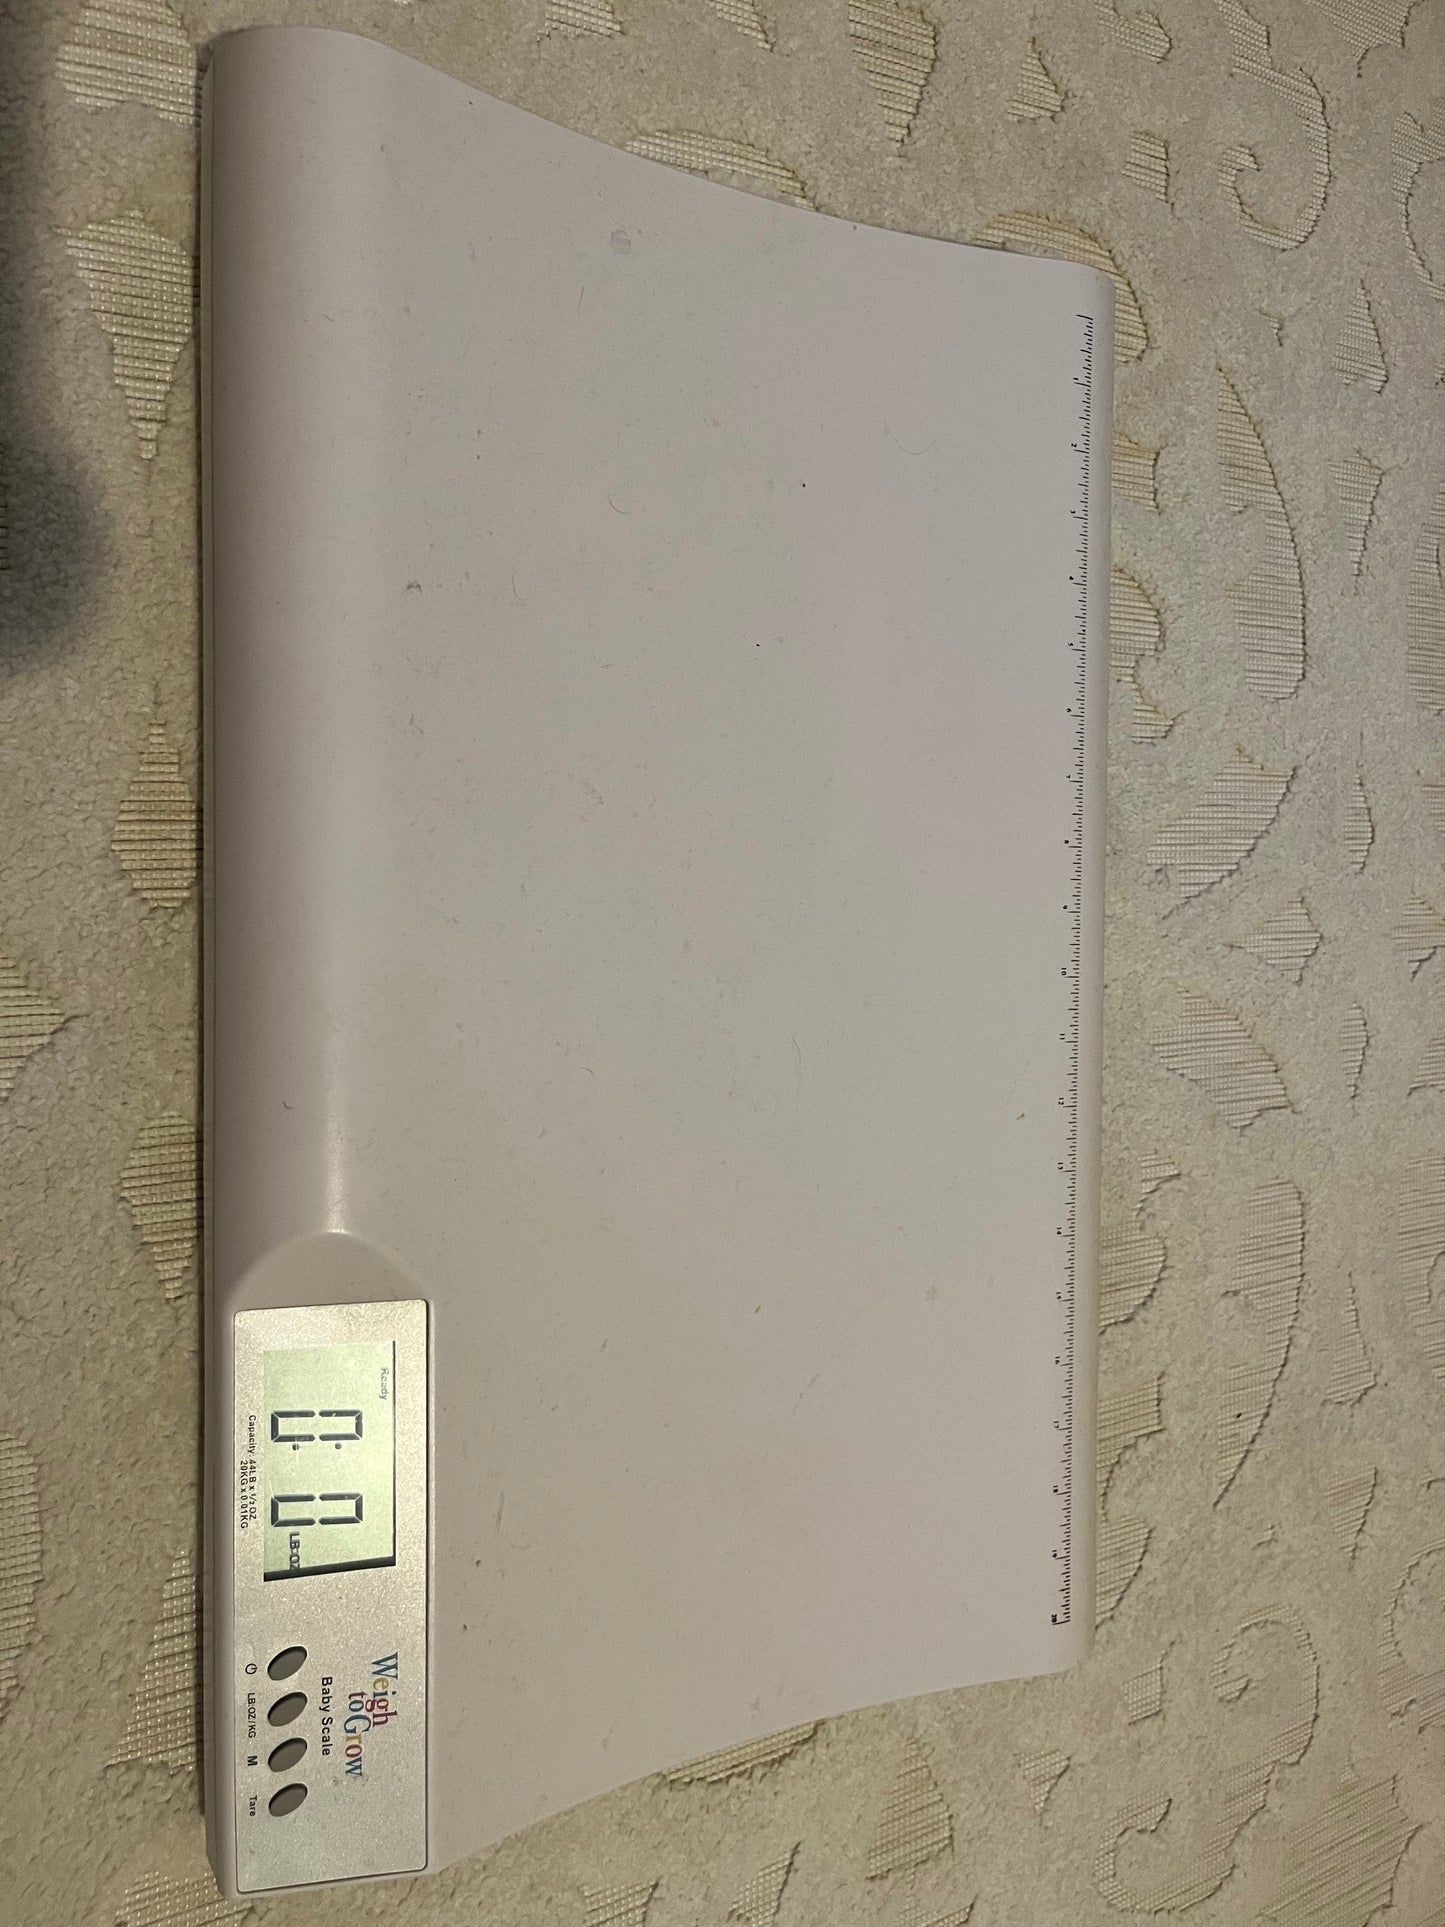 REDUCED: Infant scale